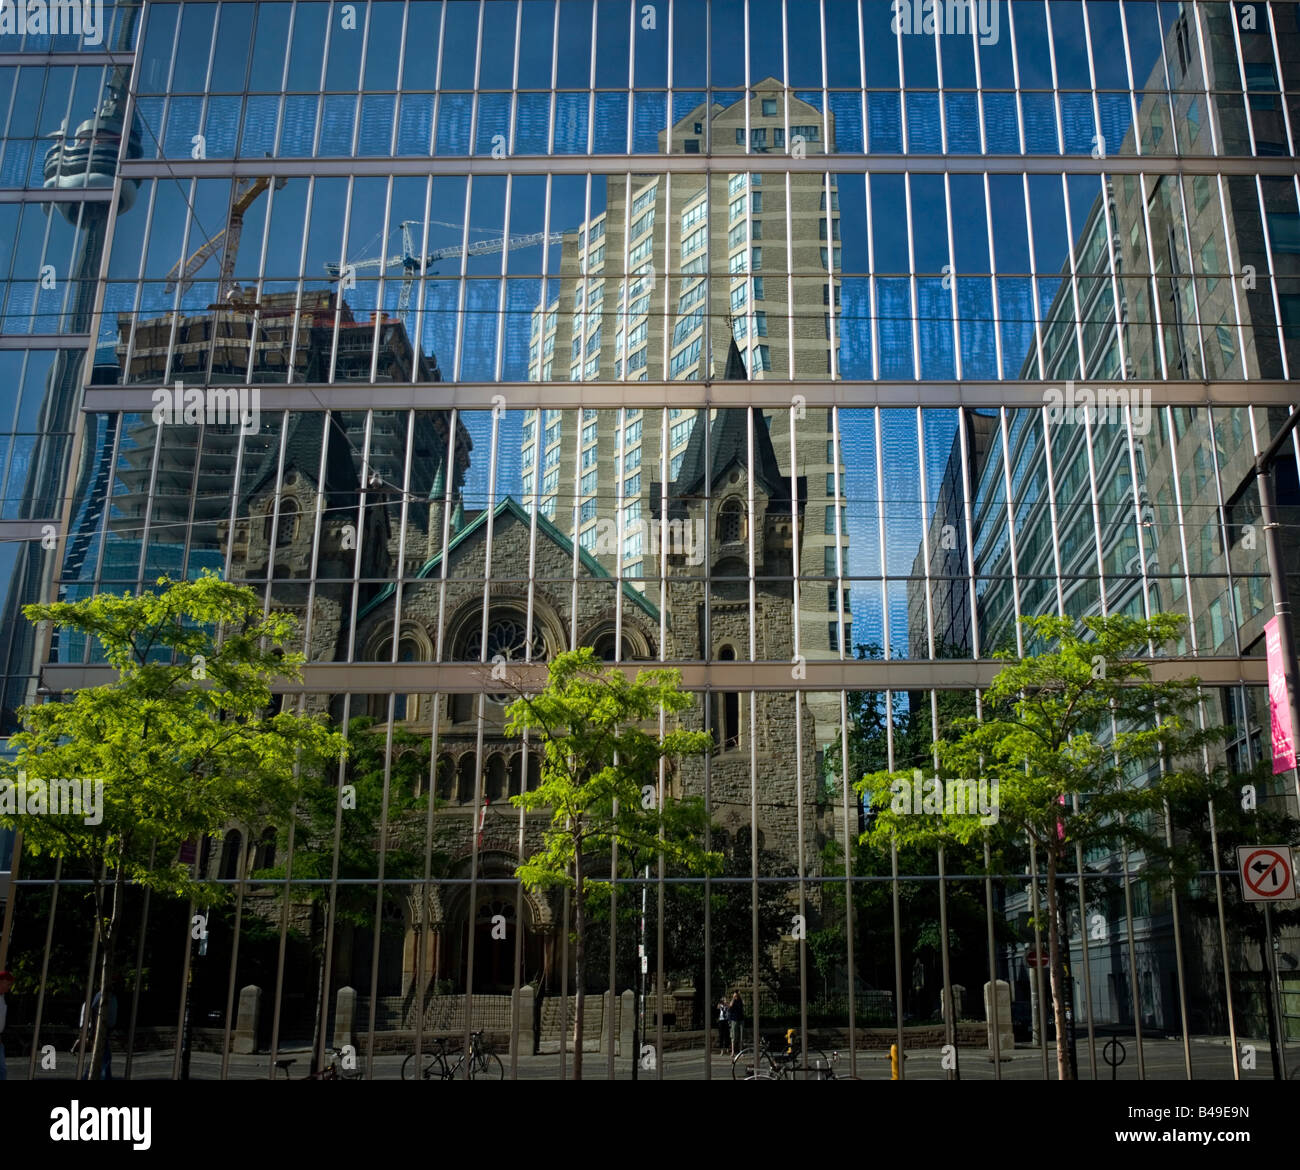 Toronto city skyline reflected in glass skyscraper, Ontario, Canada Banque D'Images